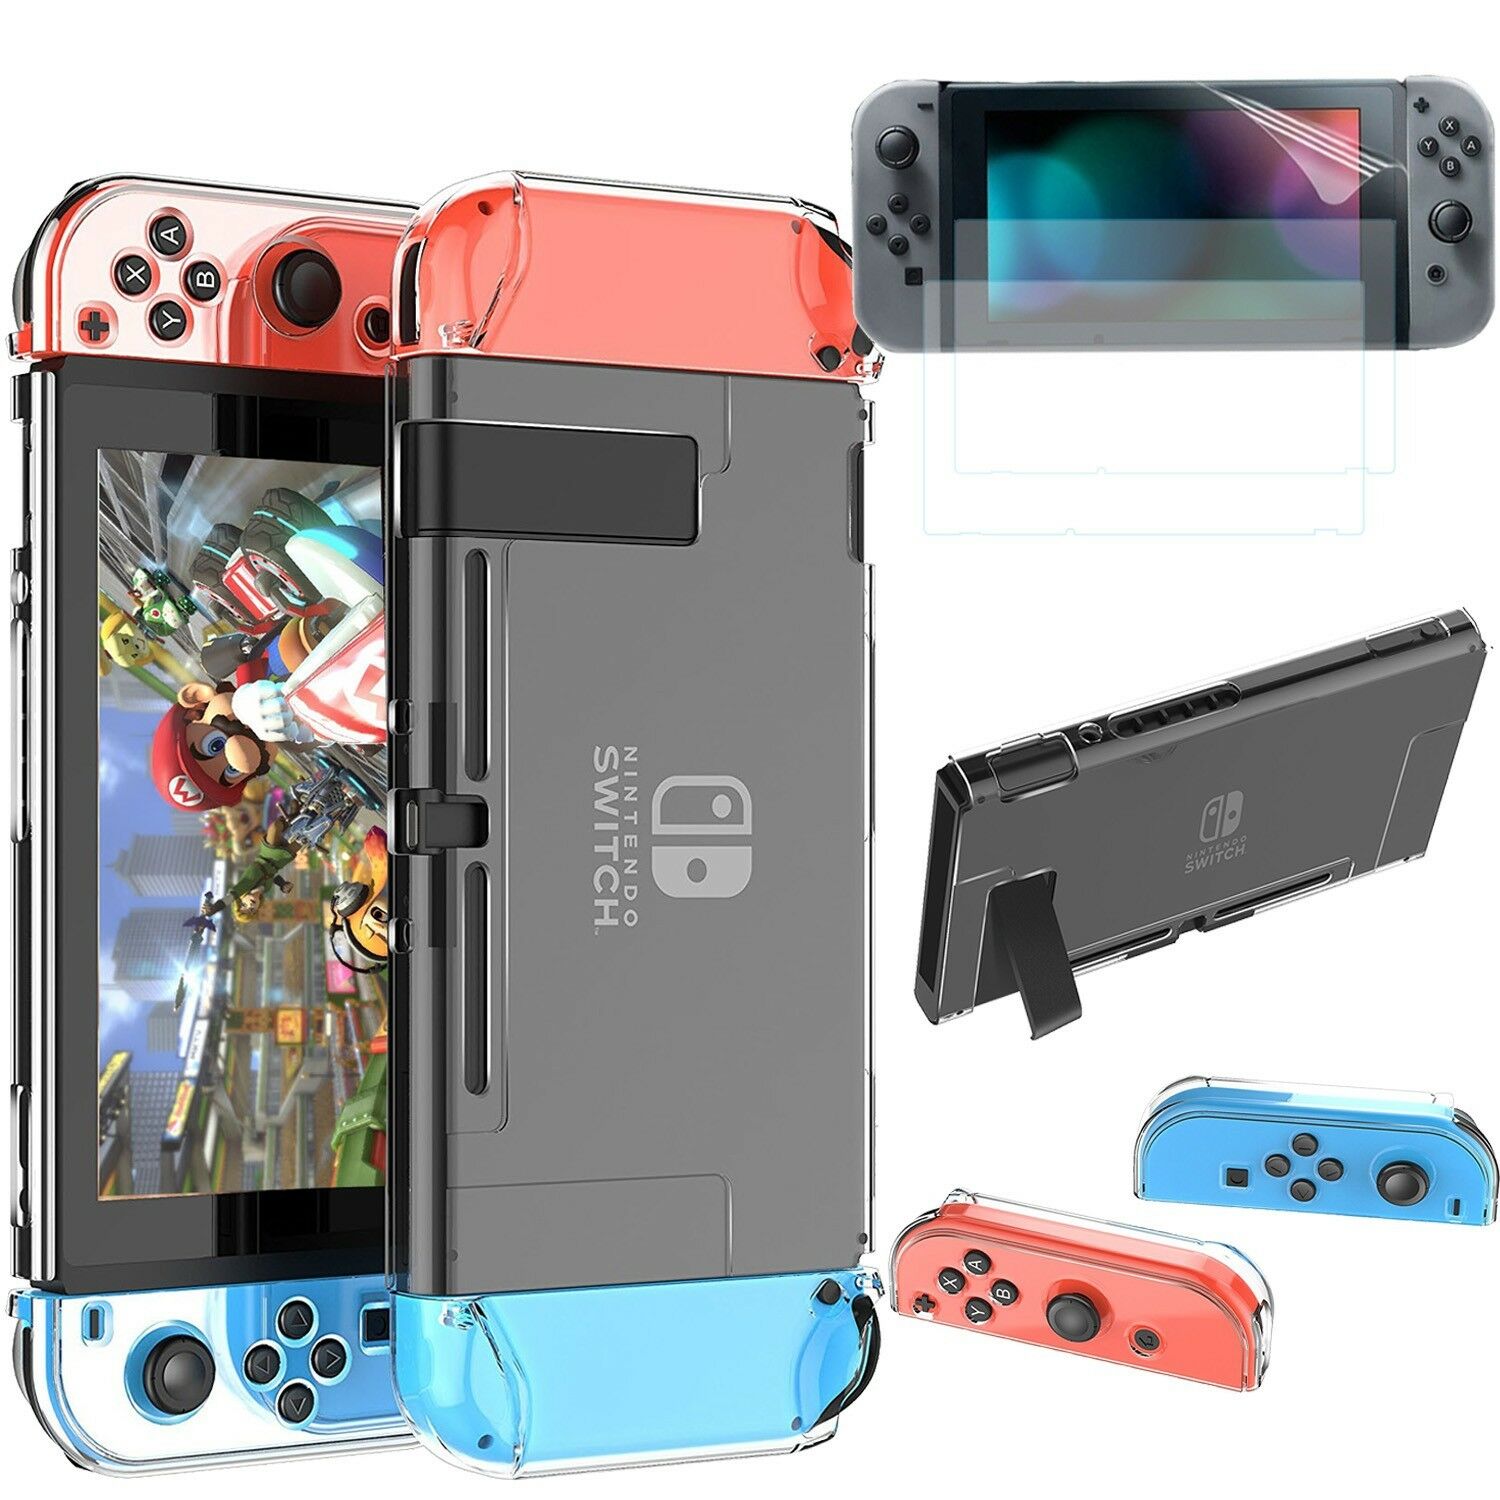 Hd Screen Protector Front Film 2x + Hard Clear Case Cover For Nintendo Switch